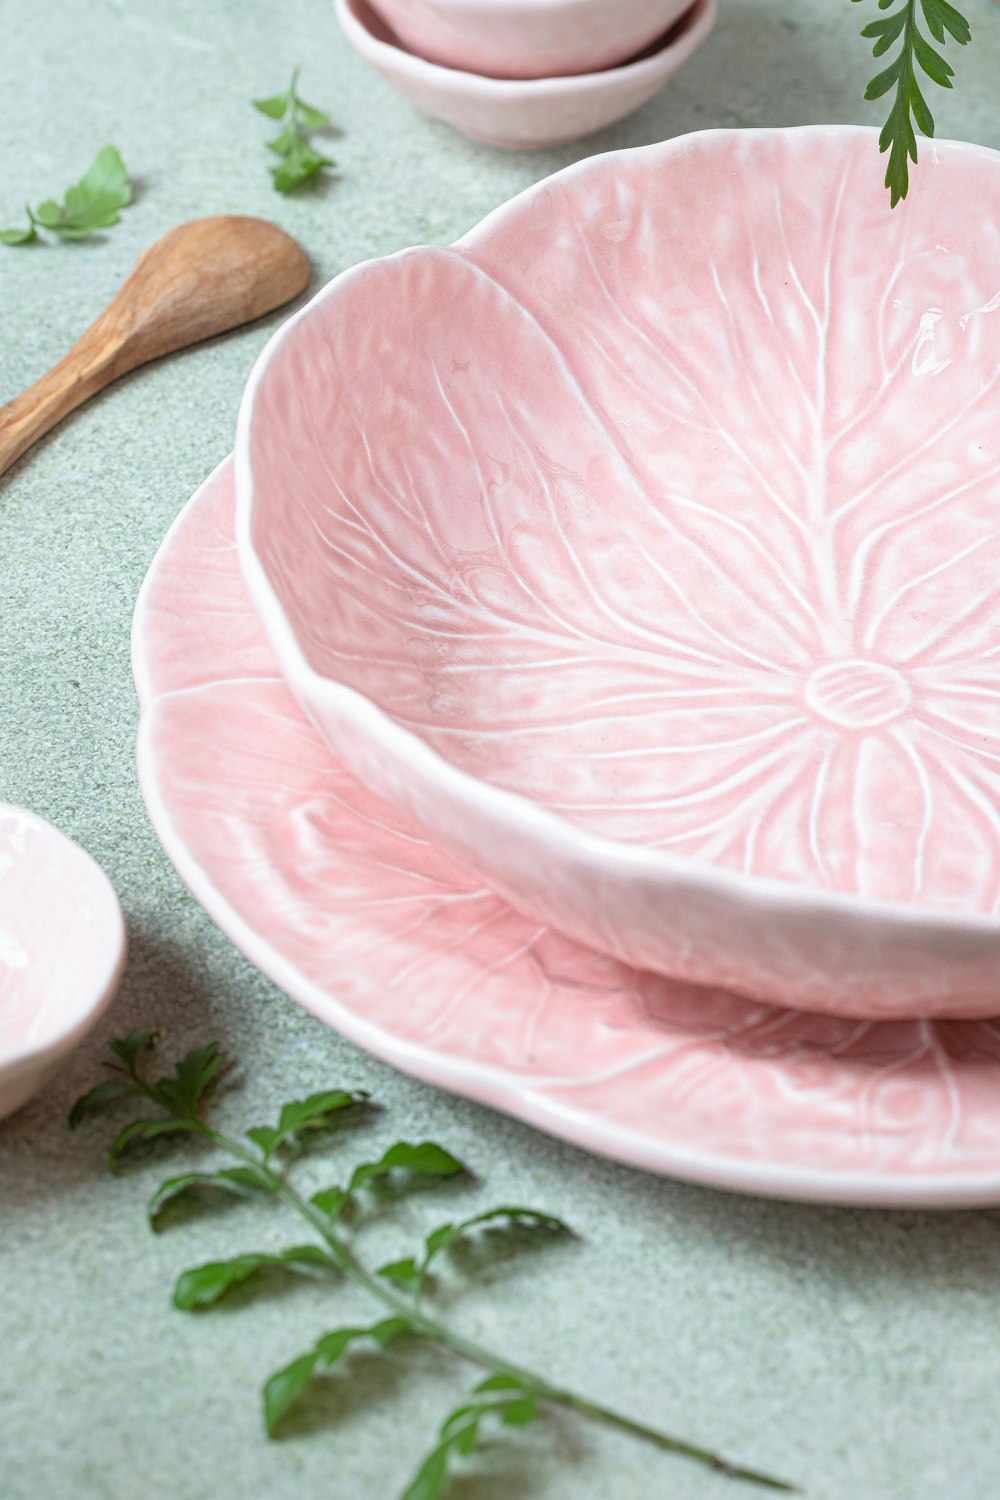 a close up of a pink plate on a table